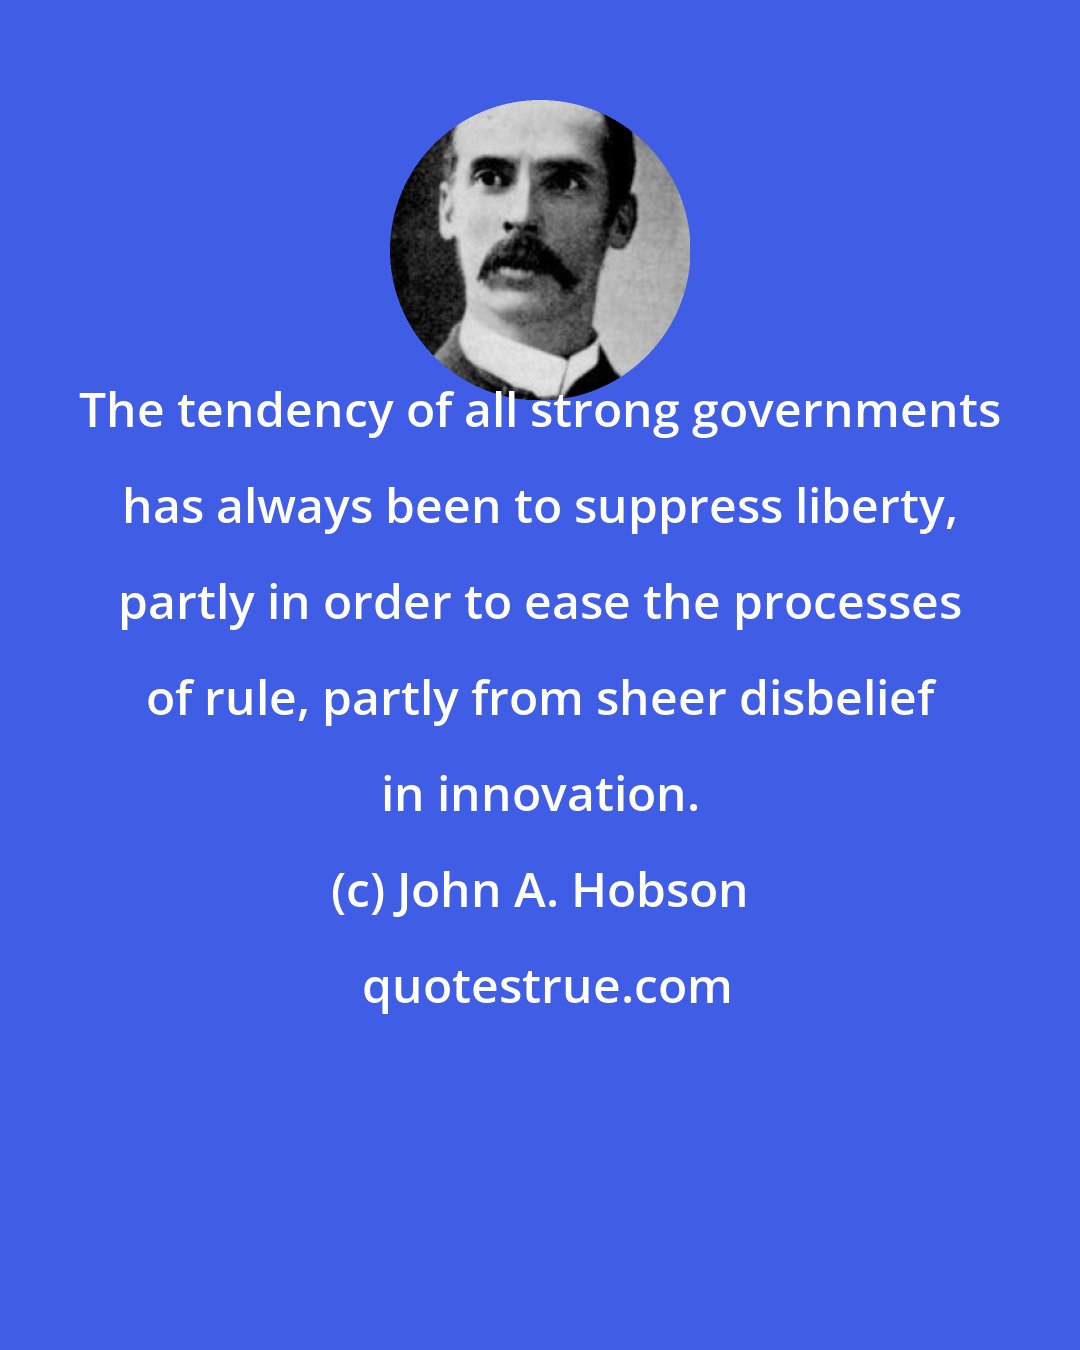 John A. Hobson: The tendency of all strong governments has always been to suppress liberty, partly in order to ease the processes of rule, partly from sheer disbelief in innovation.